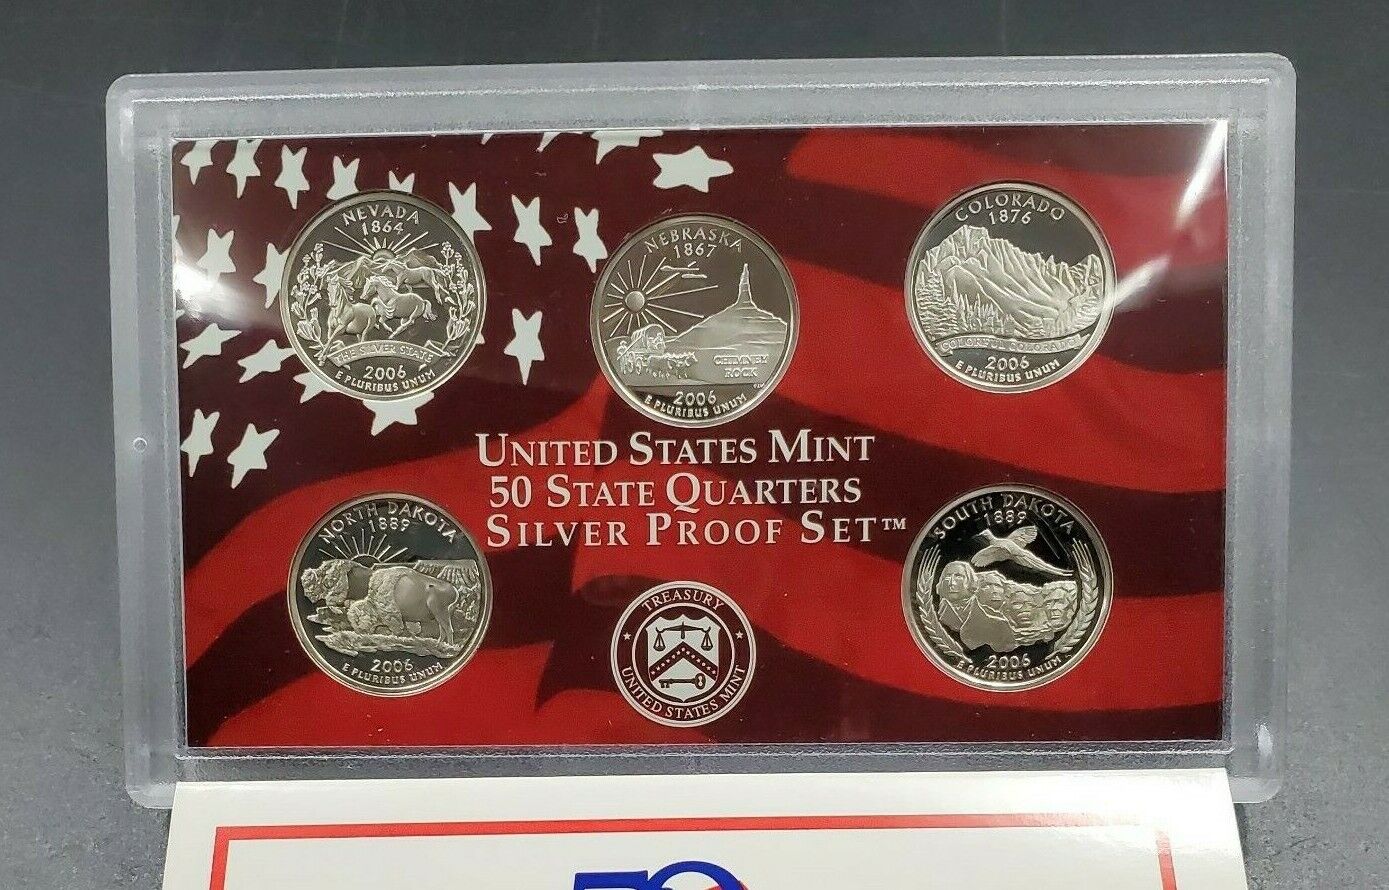 Silver Coins, US Mint Silver Dollars, Quarters, Proof Sets